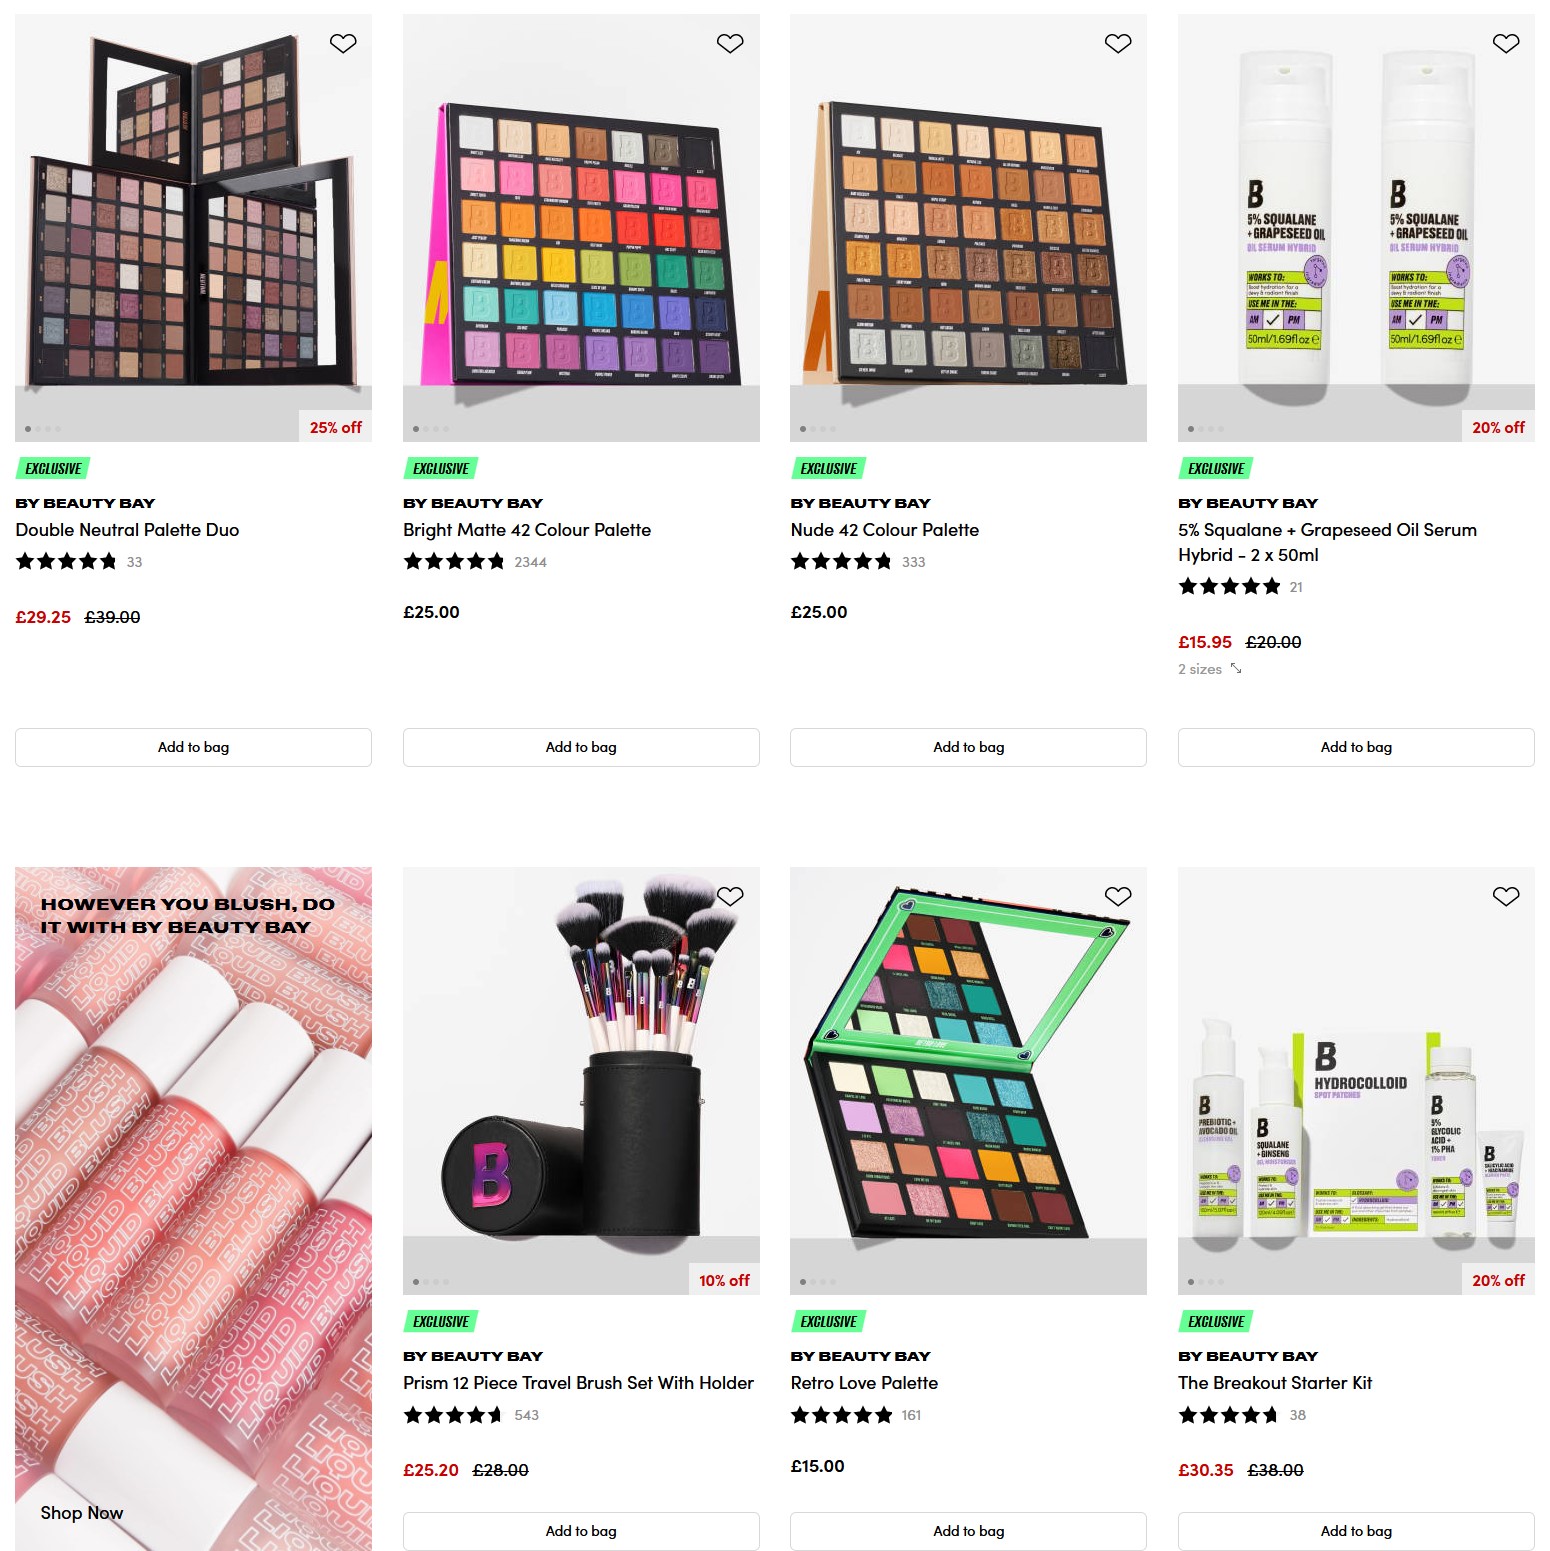 15% off By BEAUTY BAY products